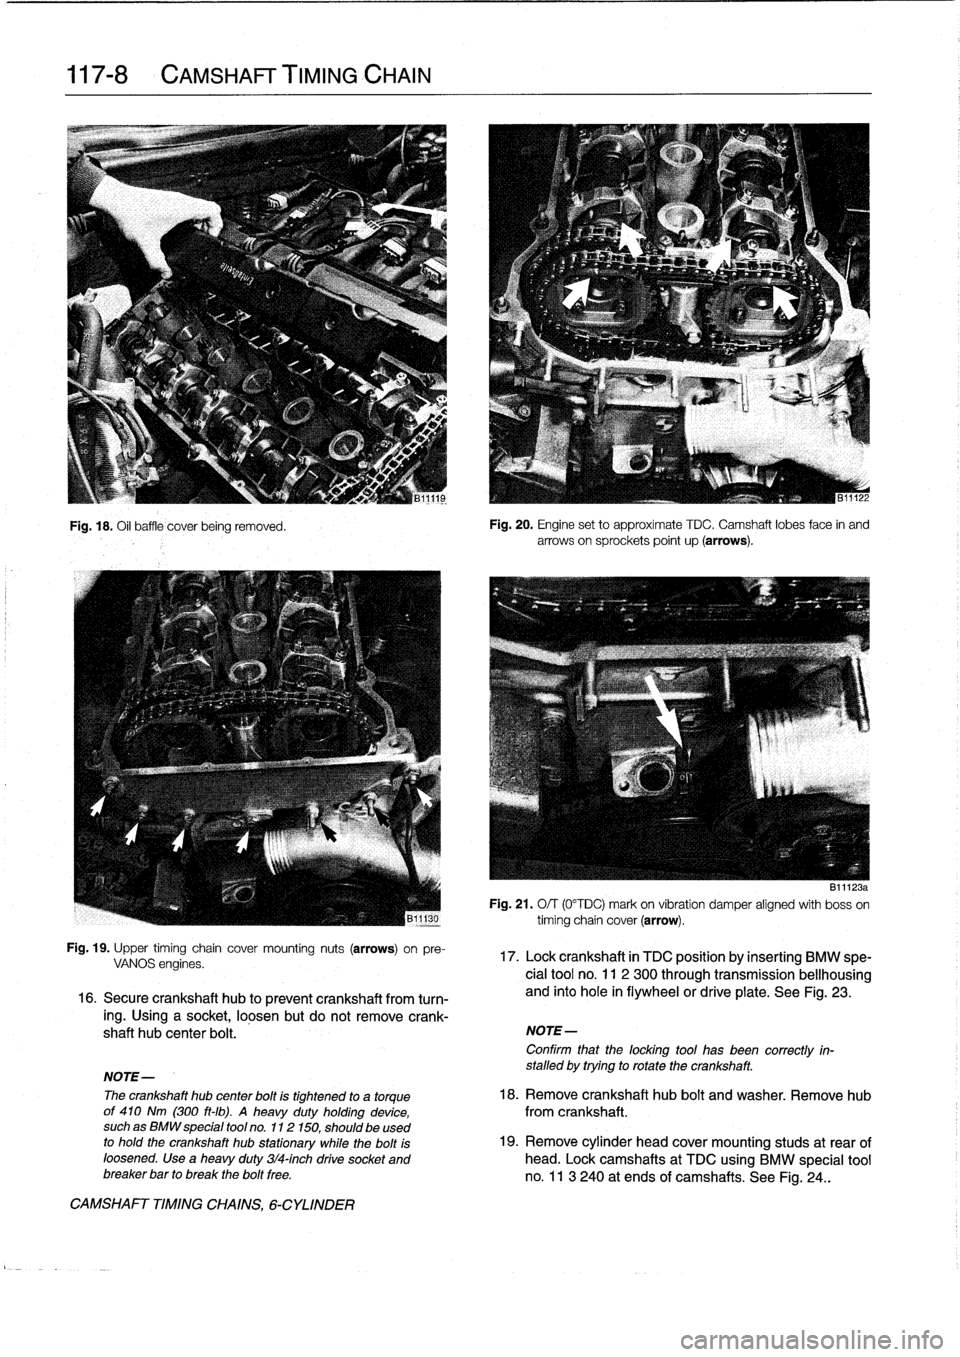 BMW 328i 1994 E36 Workshop Manual 
117-
8

	

CAMSHAFT
TIMING
CHAIN

Fig
.
18
.
Oil
baffle
cover
being
removed
.

Fig
.
19
.
Upper
timing
chaincover
mounting
nuts
(arrows)
on
pre-
VANOS
engines
.

16
.
Secure
crankshaft
hub
to
preven